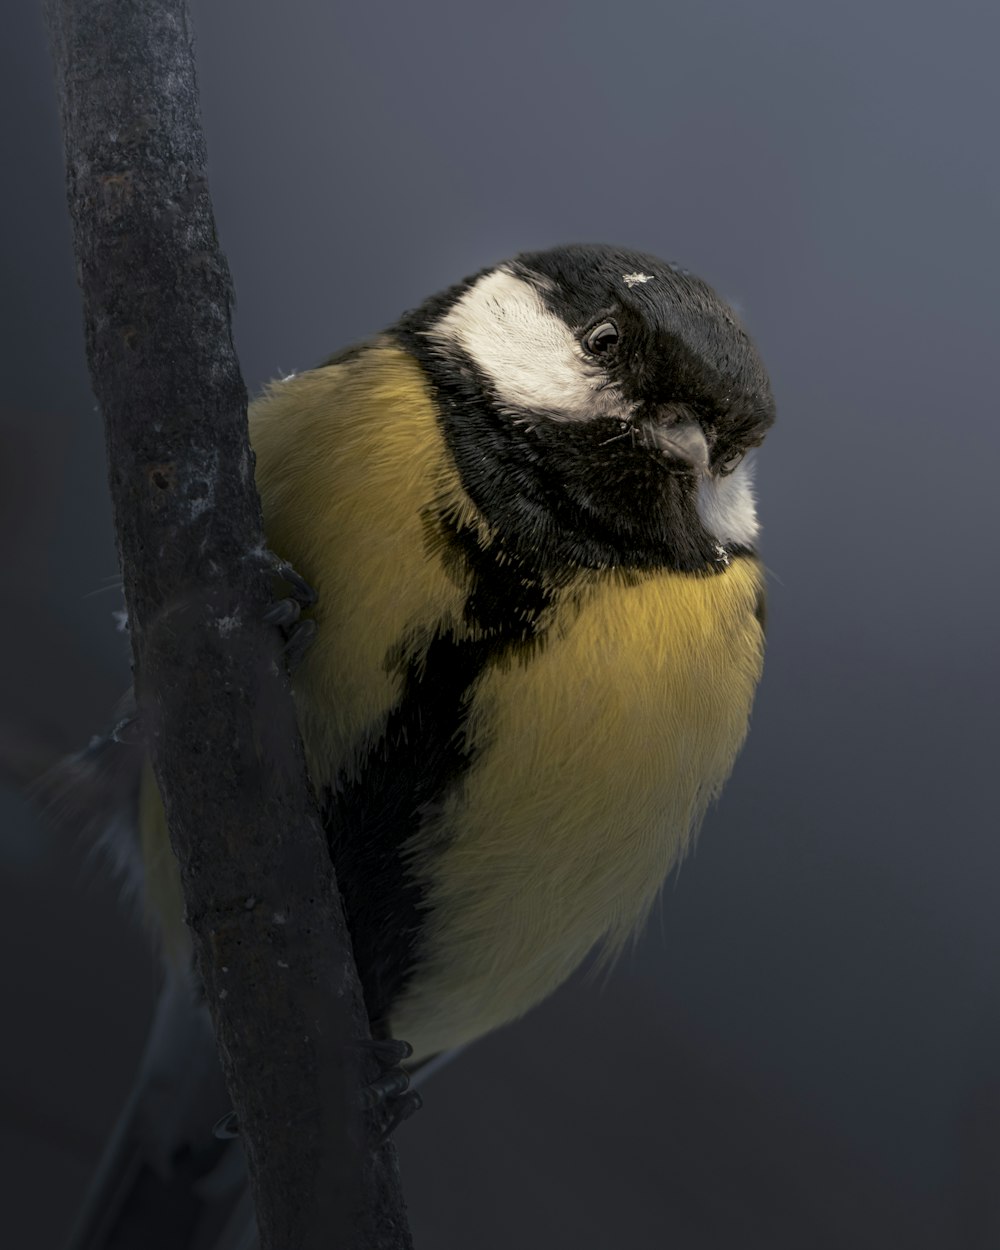 a yellow and black bird perched on a tree branch